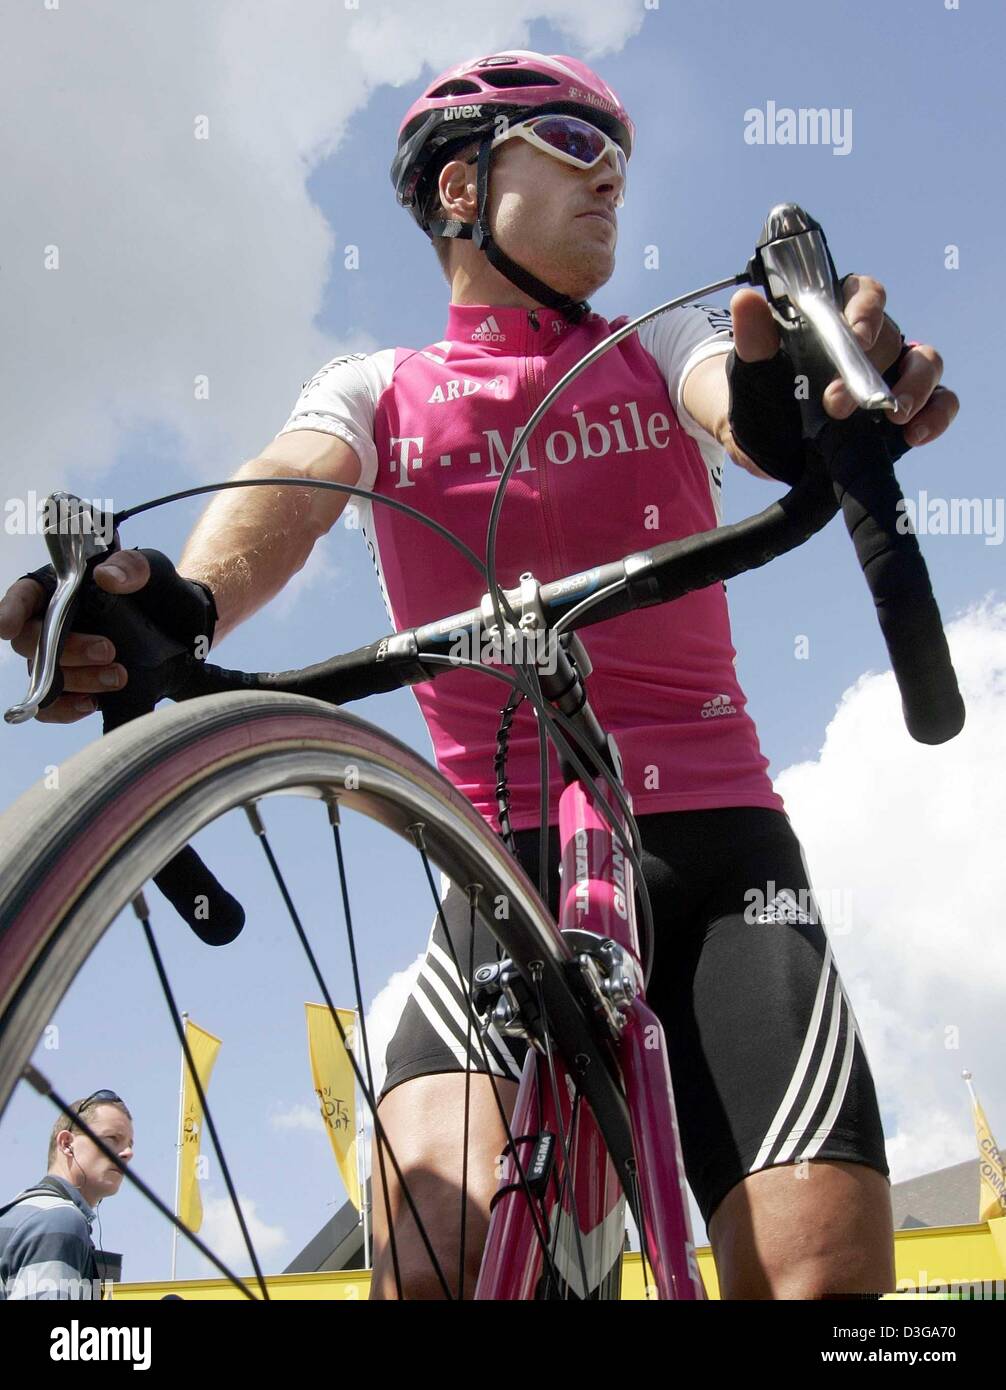 dpa) - German Olympic cycling champion Jan Ullrich (R) of team T-mobile  awaits the start of the third stage of the Tour de France in Waterloo,  Belgium, 6 July 2004. The third